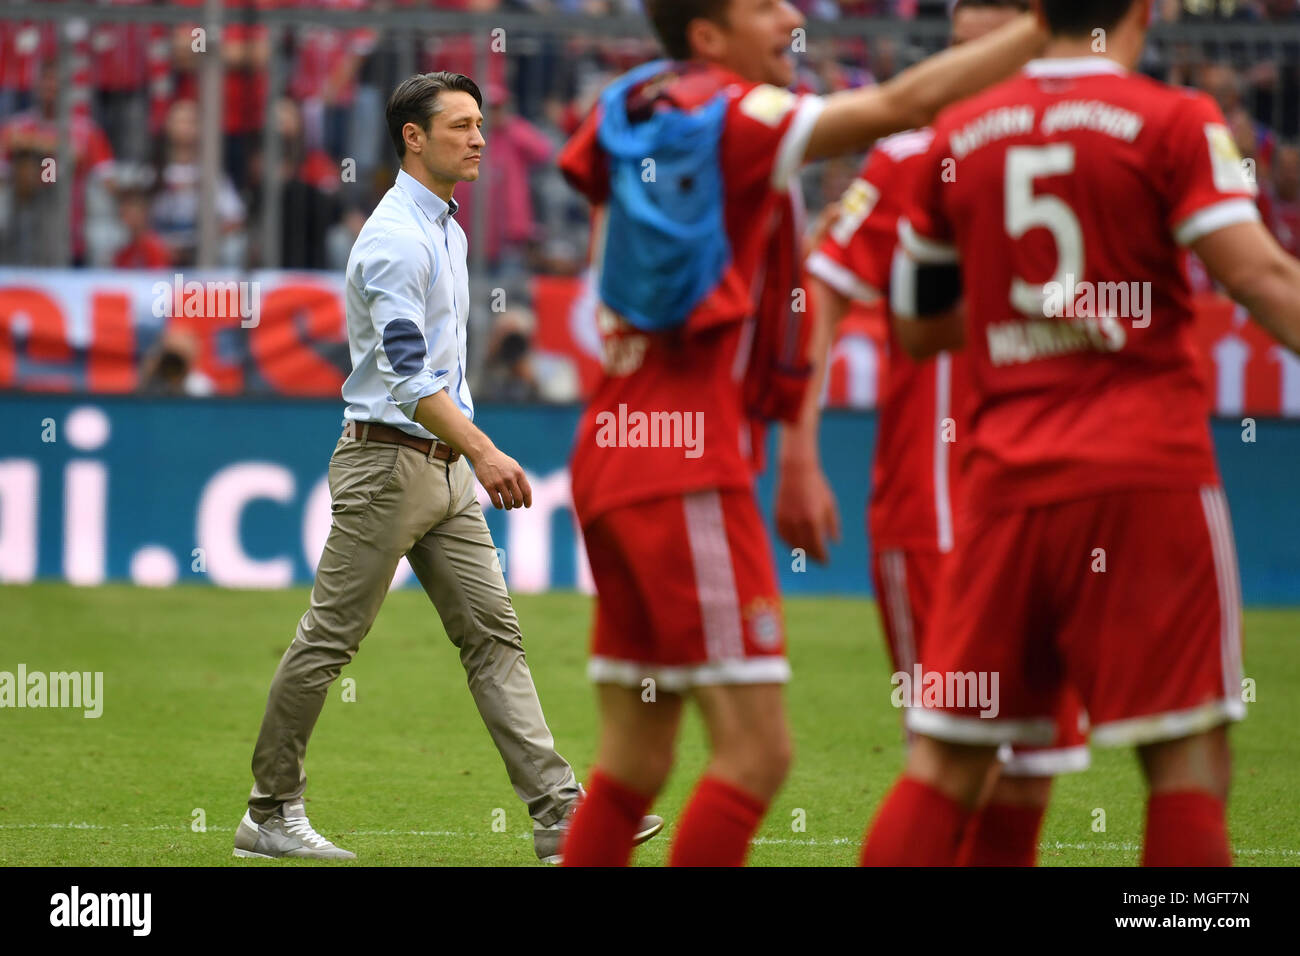 Munich, Germany28th Apr, 2018. Niko KOVAC (coach Eintracht Frankfurt),  walks after the end of the game, Thomas MUELLER (MULLER, FC Bayern Munich)  and Mats HUMMELS (FC Bayern Munich) are in front. Soccer